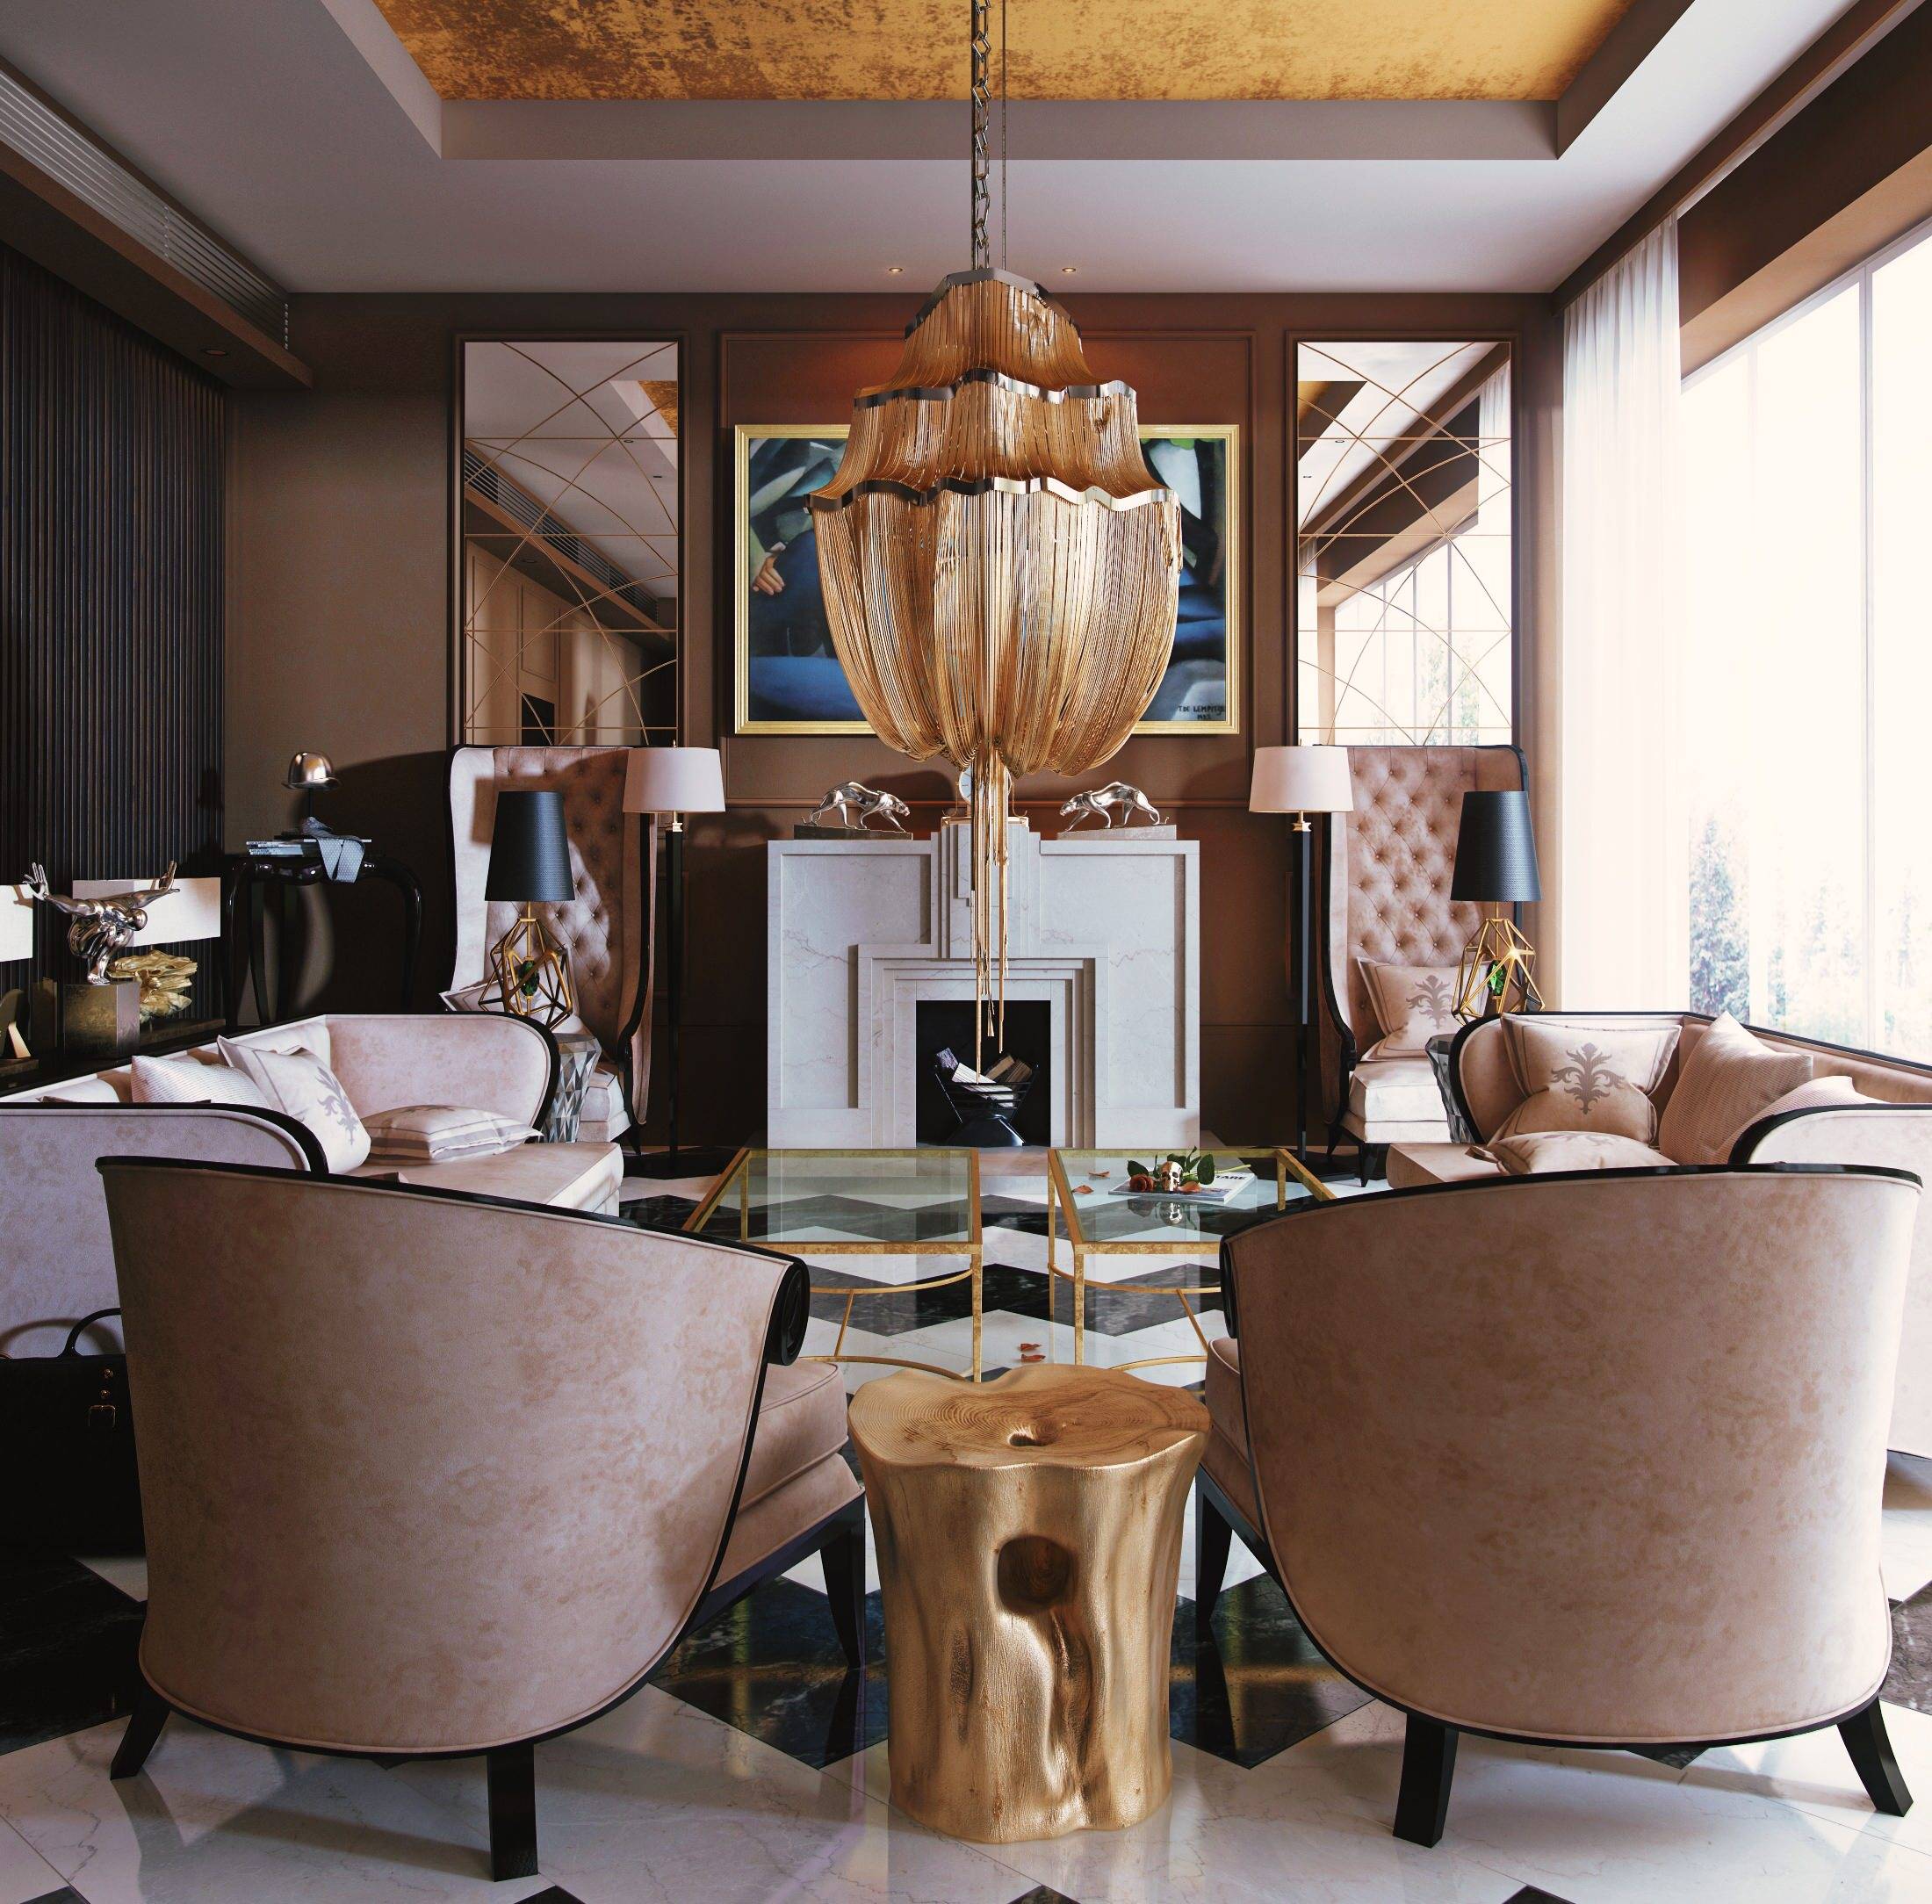 Recognizable art deco features (from Houzz)